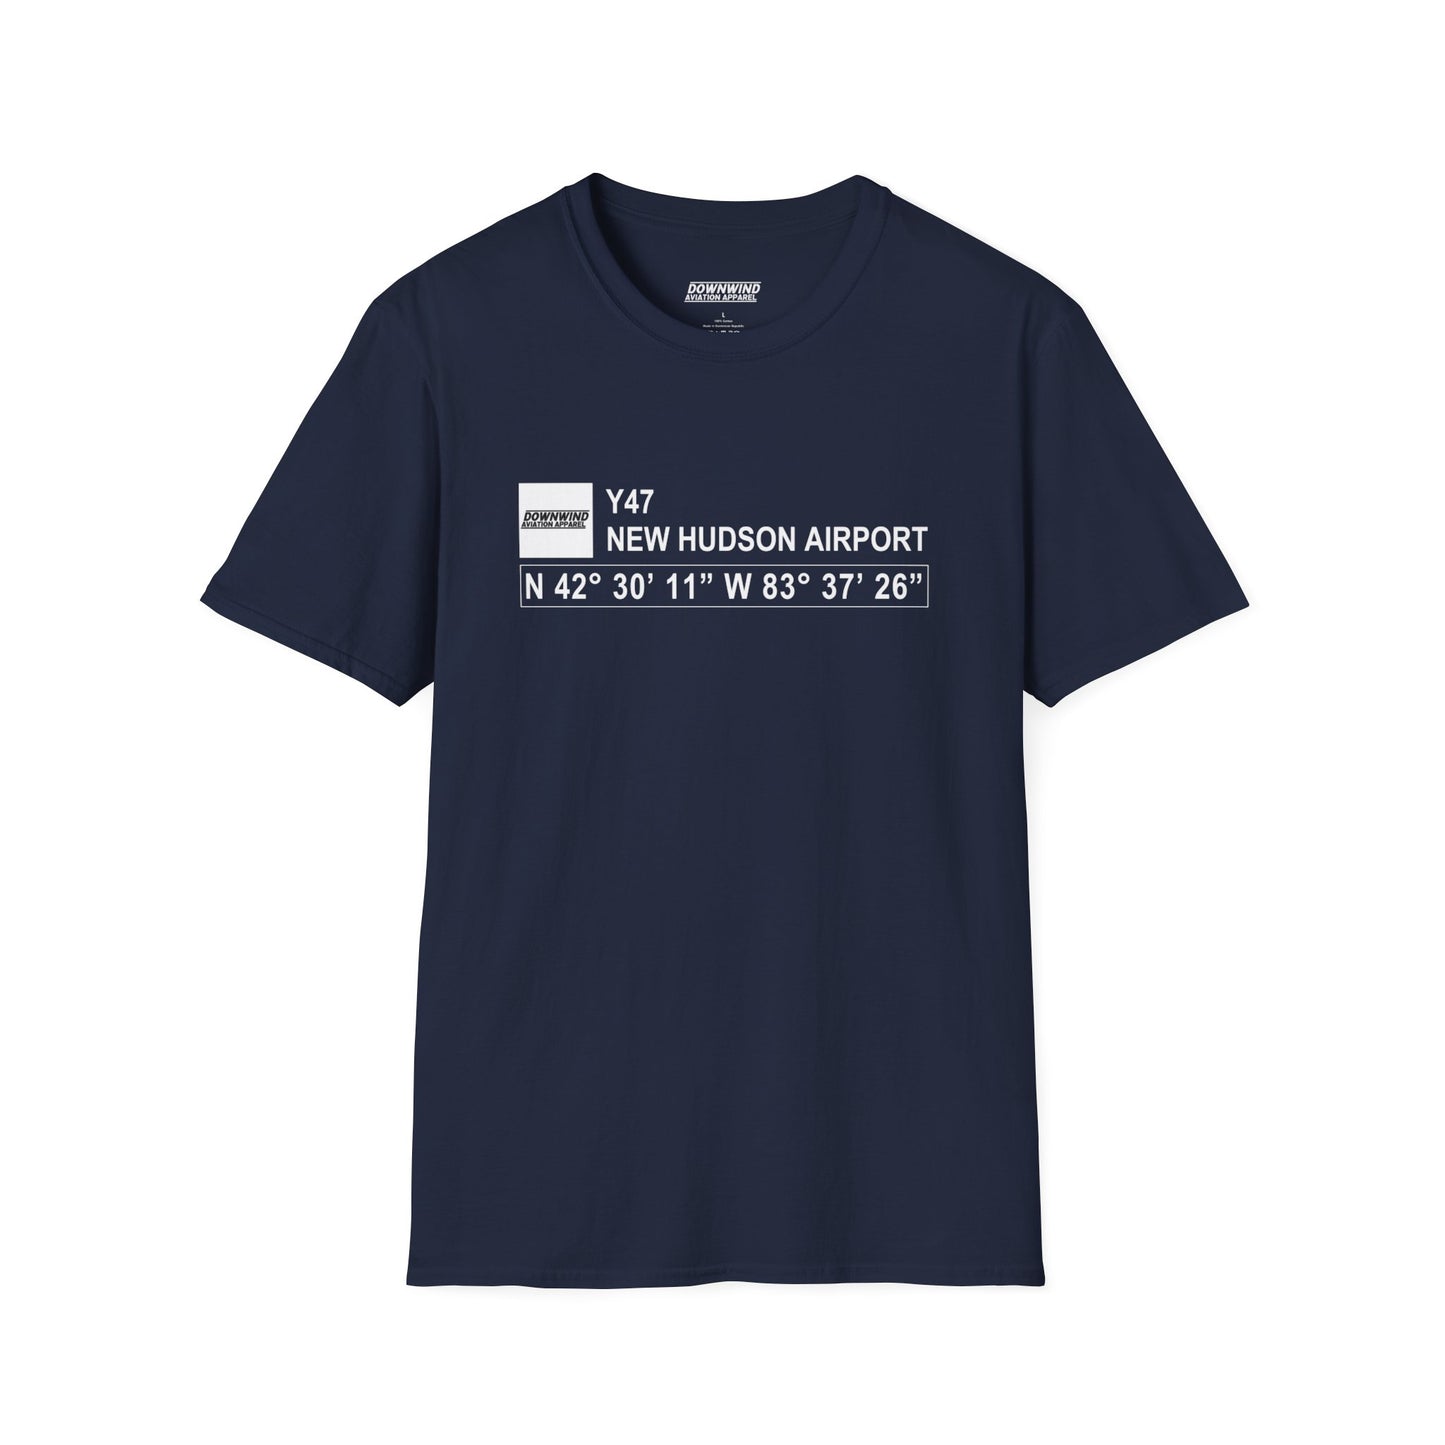 Y47 / New Hudson Airport T-Shirt